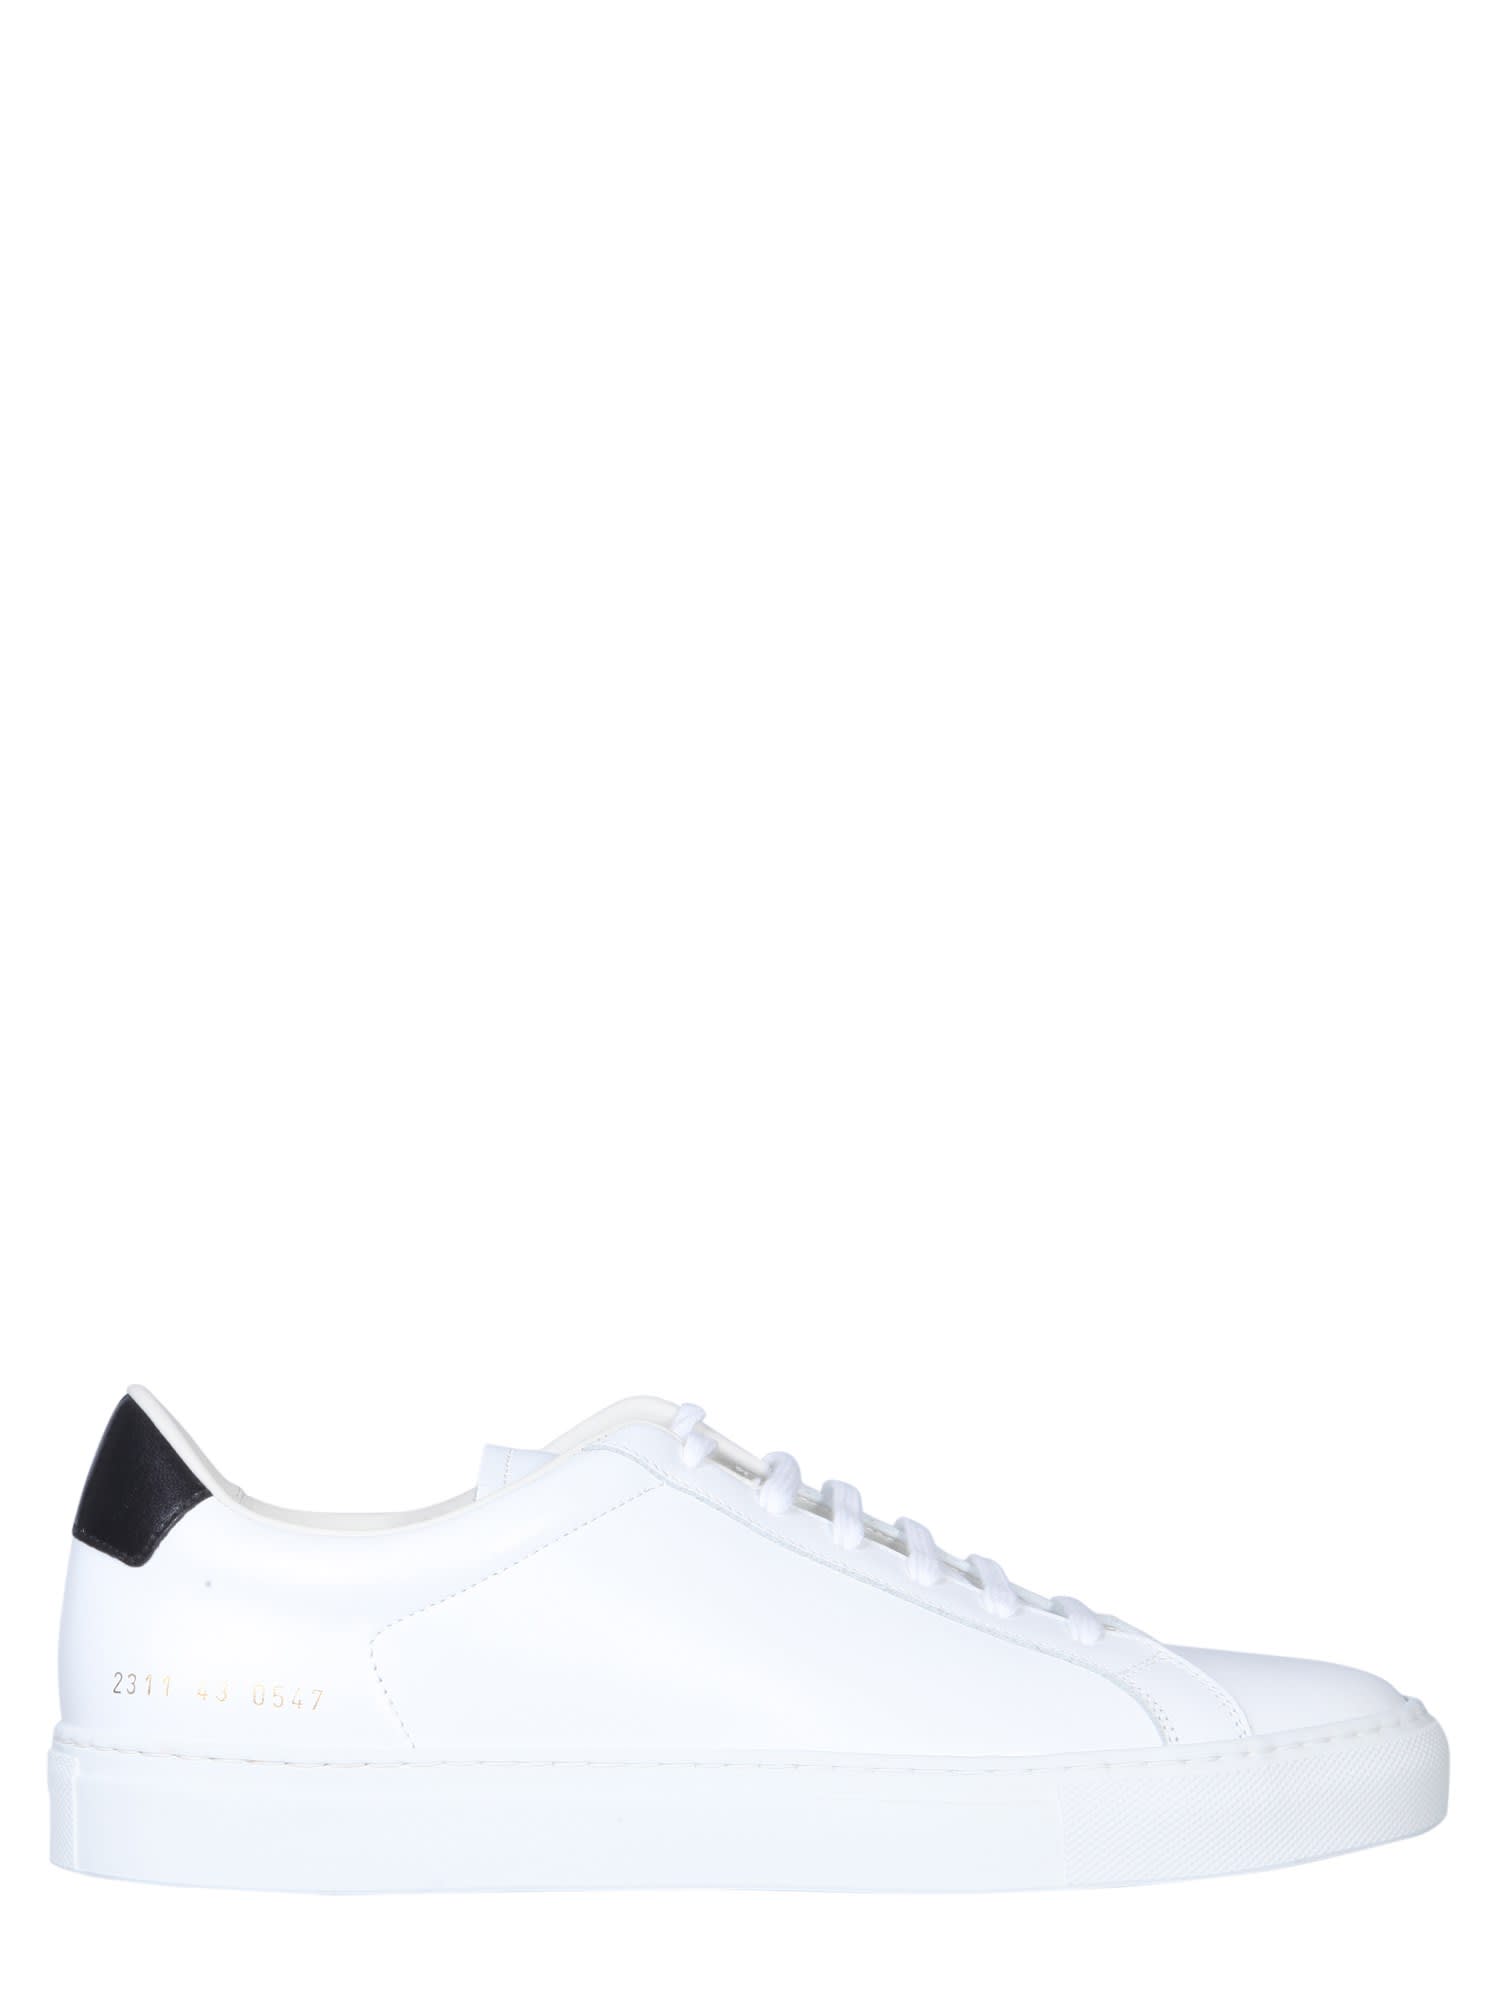 Common Projects Low Retro Sneaker